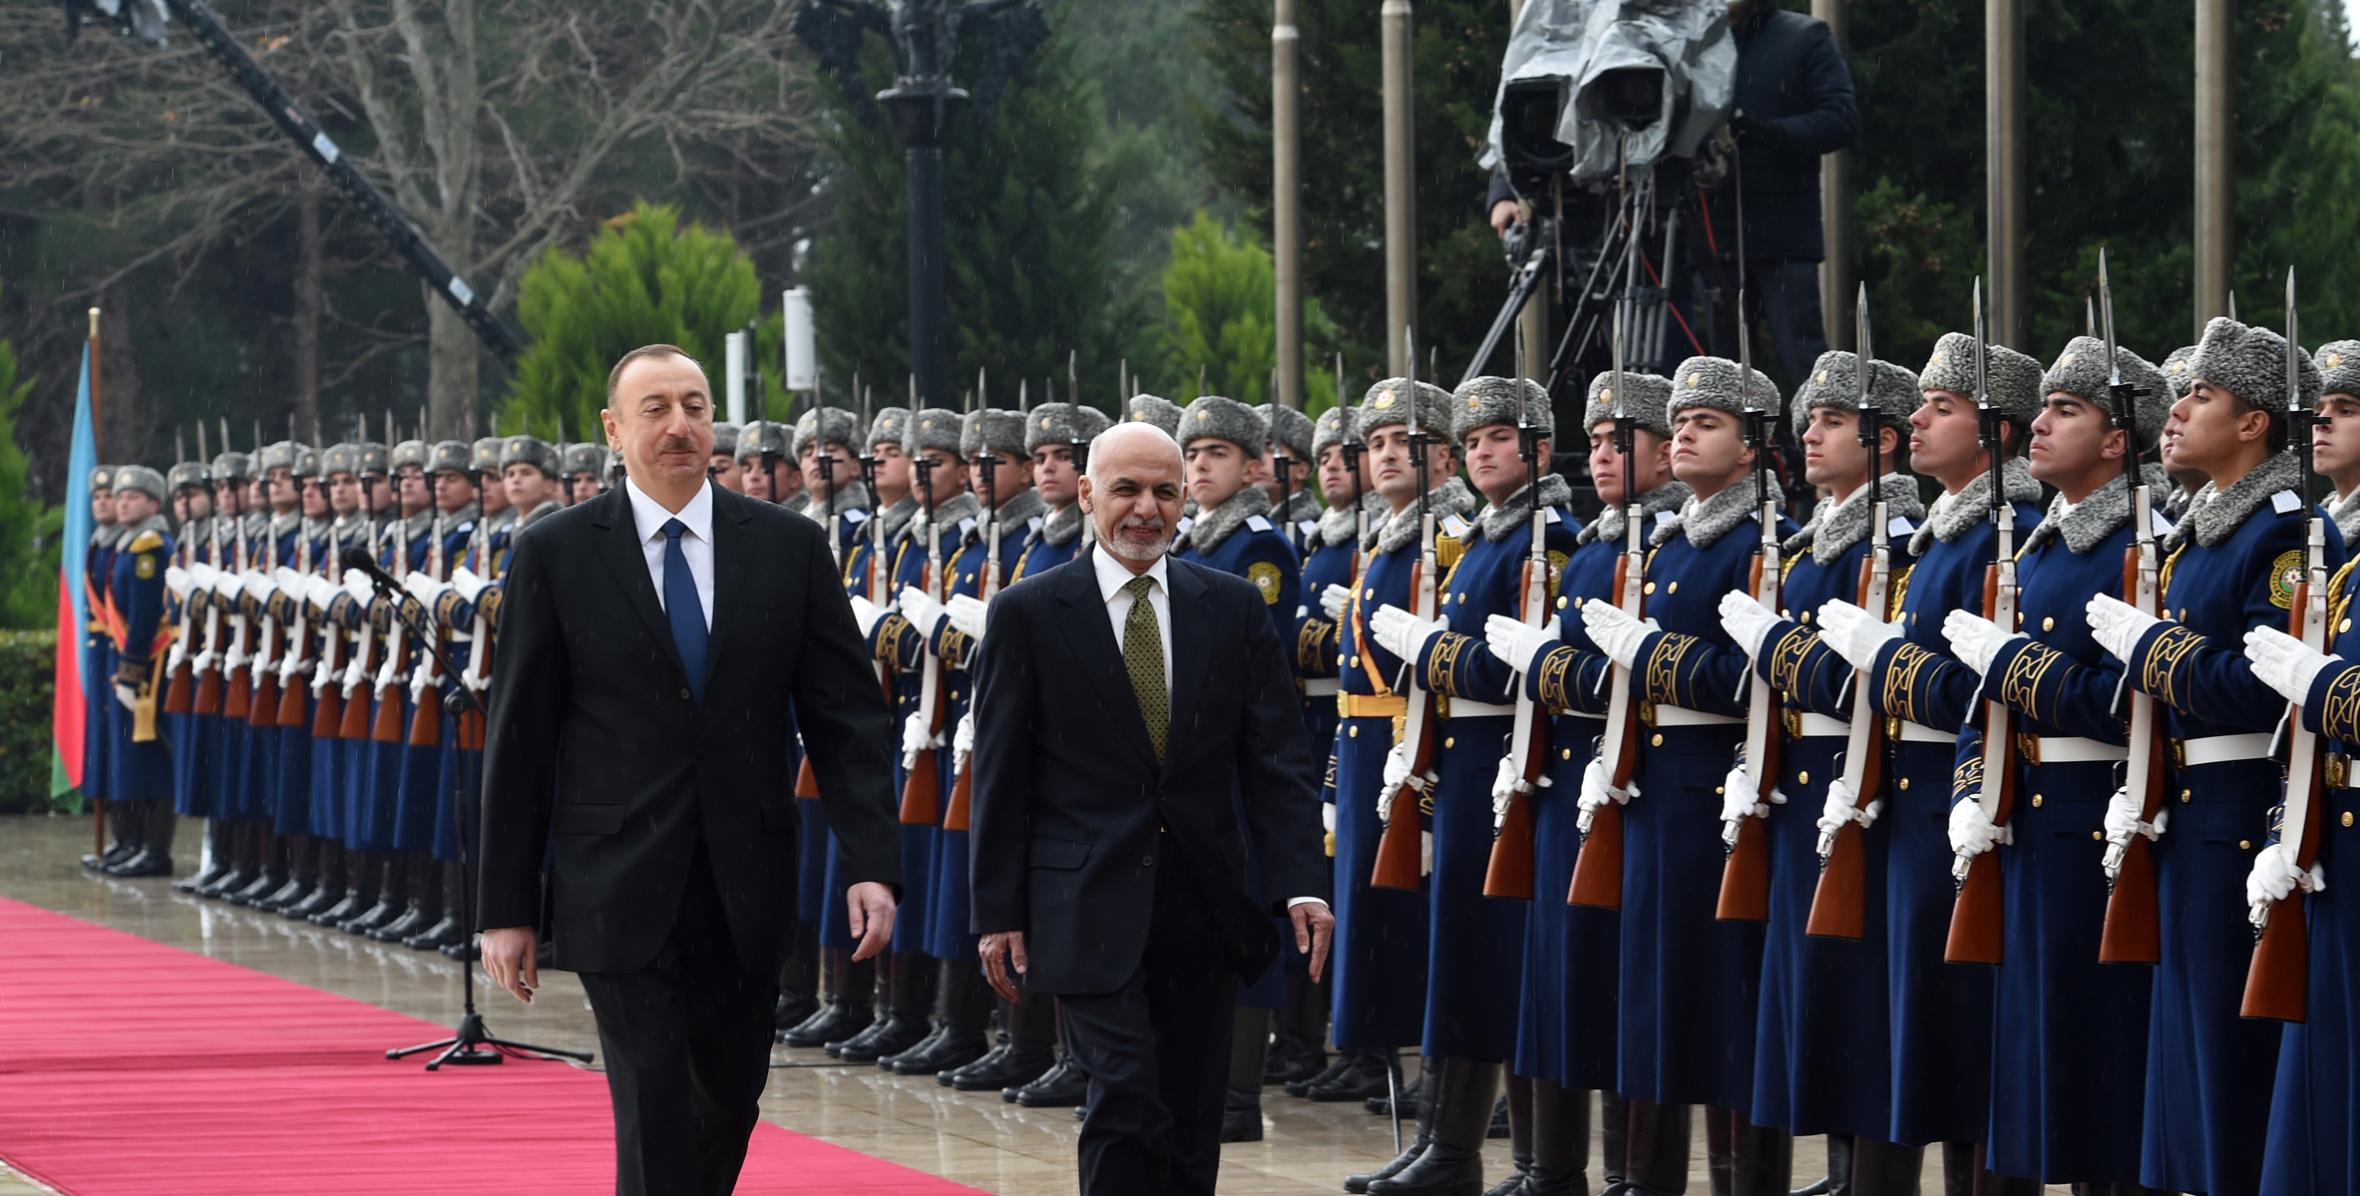 Official welcoming ceremony for President of Afghanistan Mohammad Ashraf Ghani was held